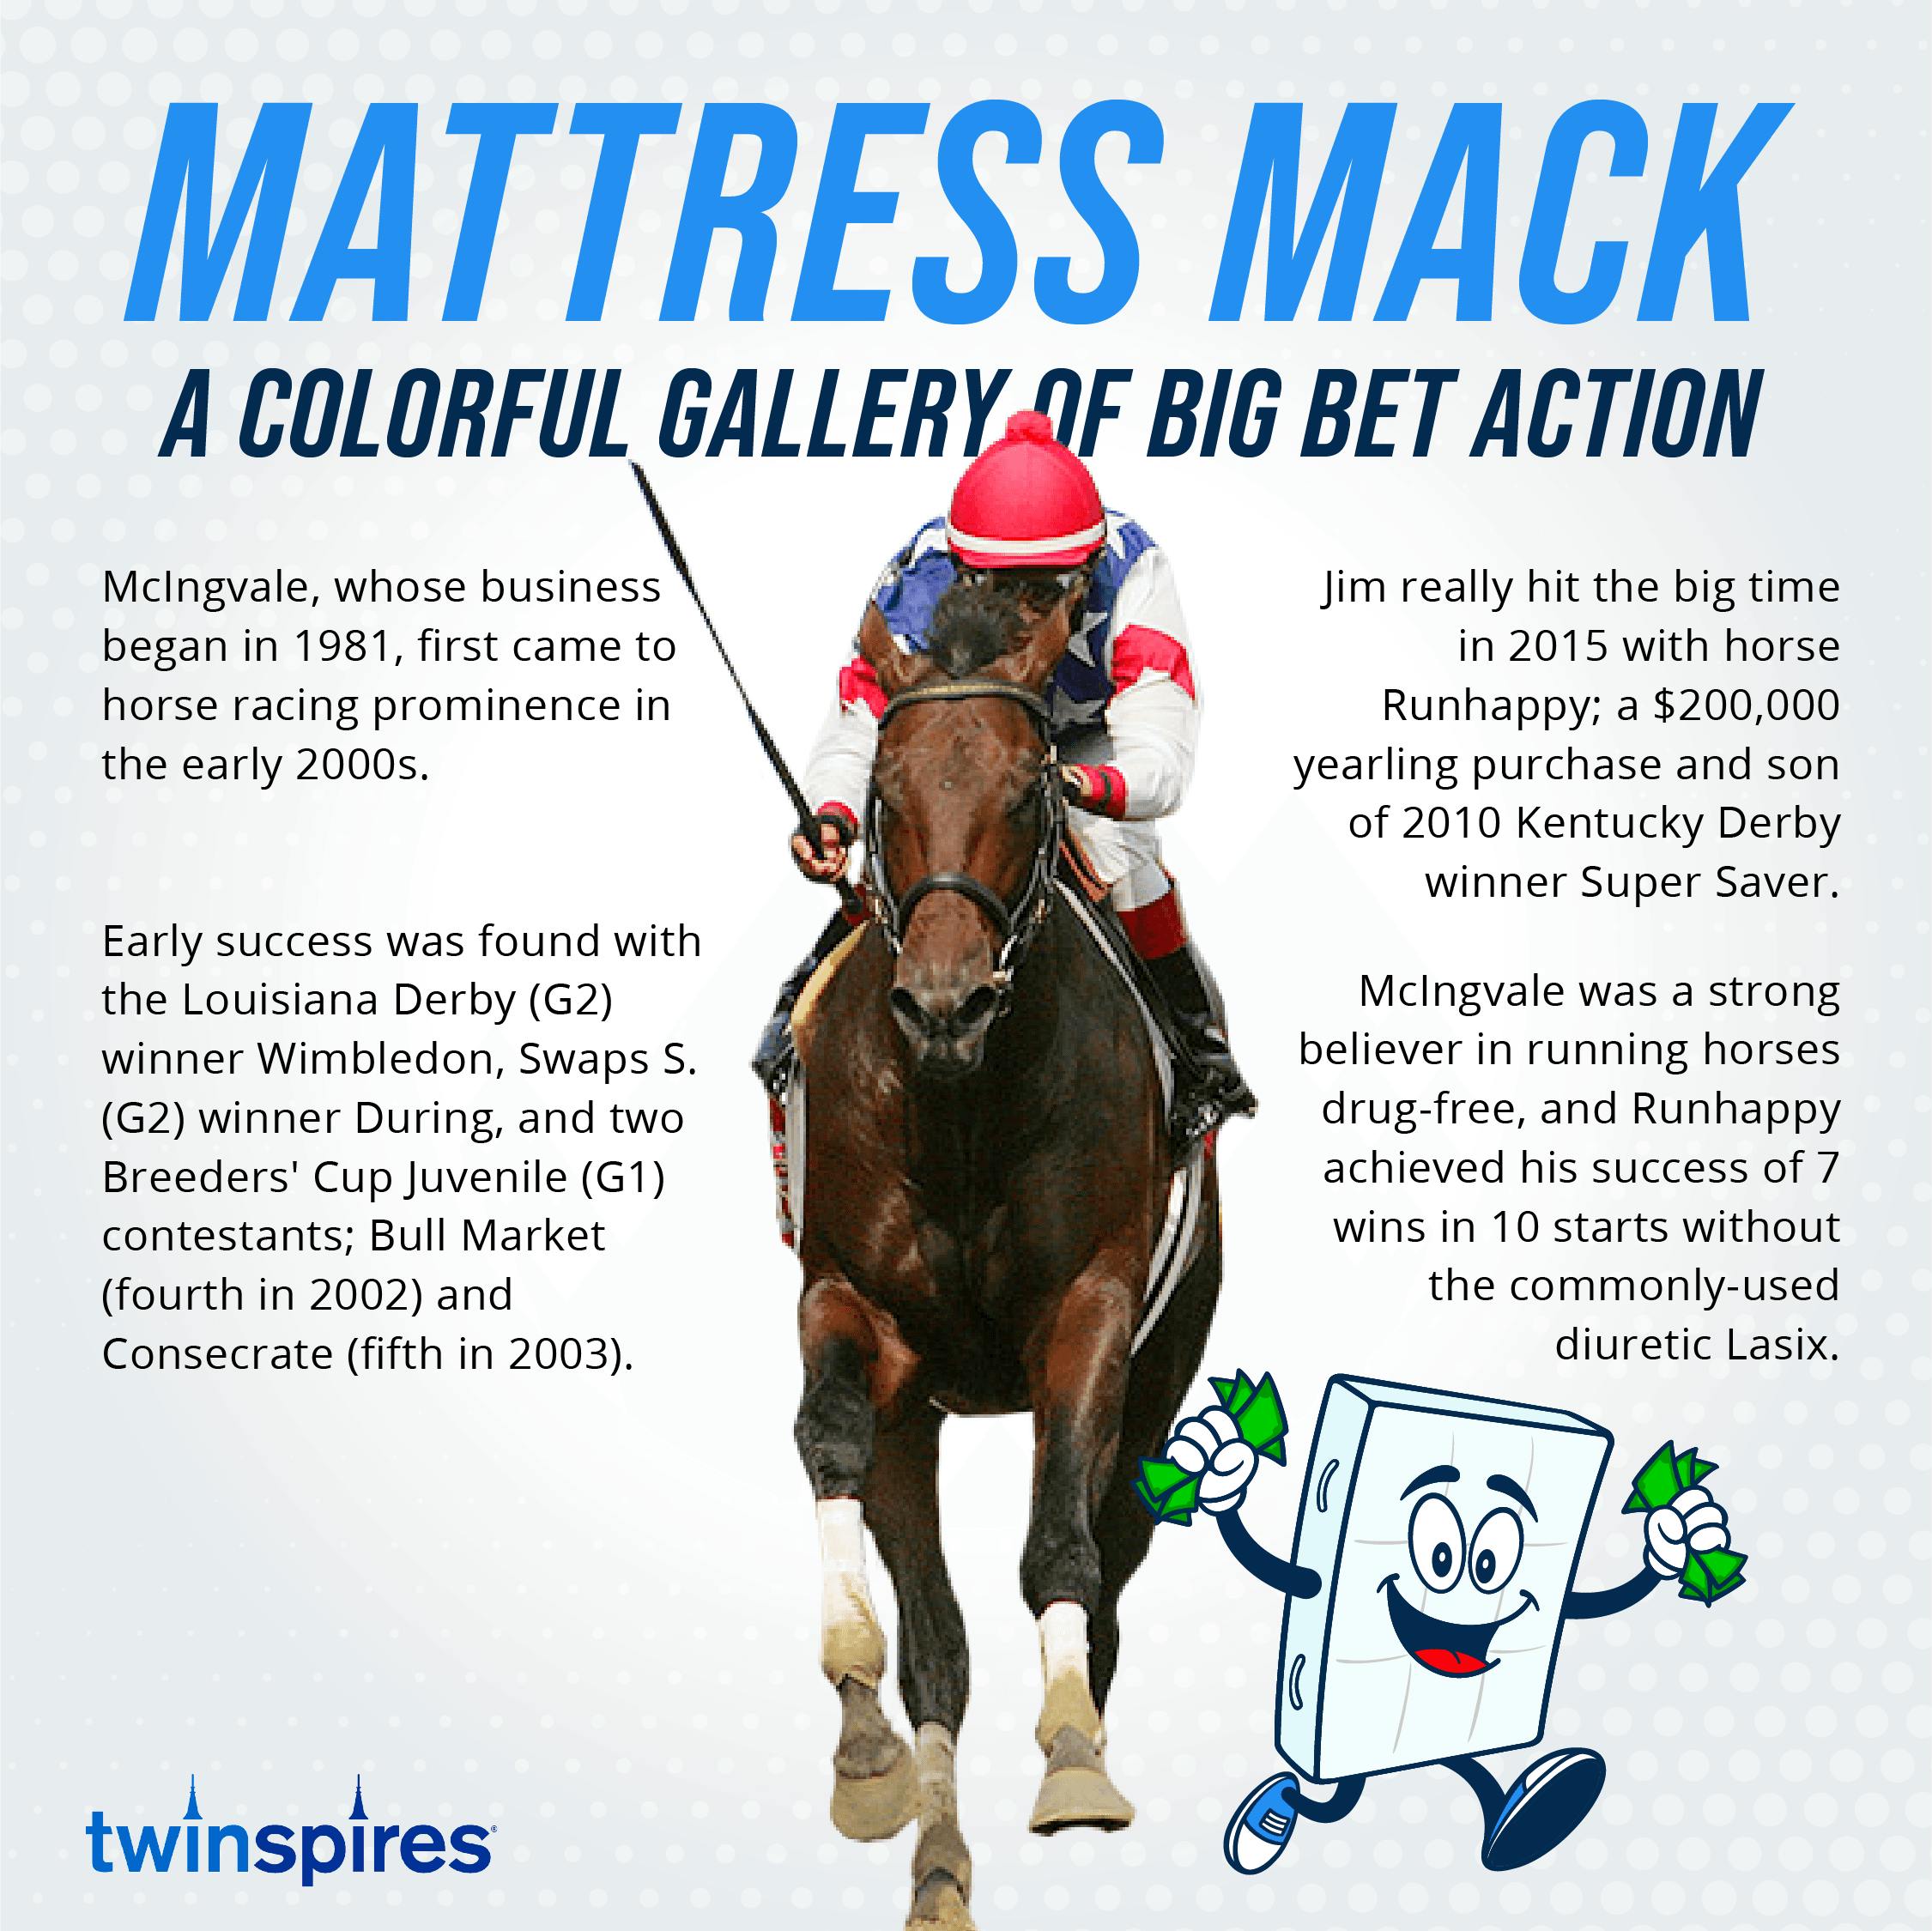 Who is this 'Mattress Mack,' and why does he do what he does